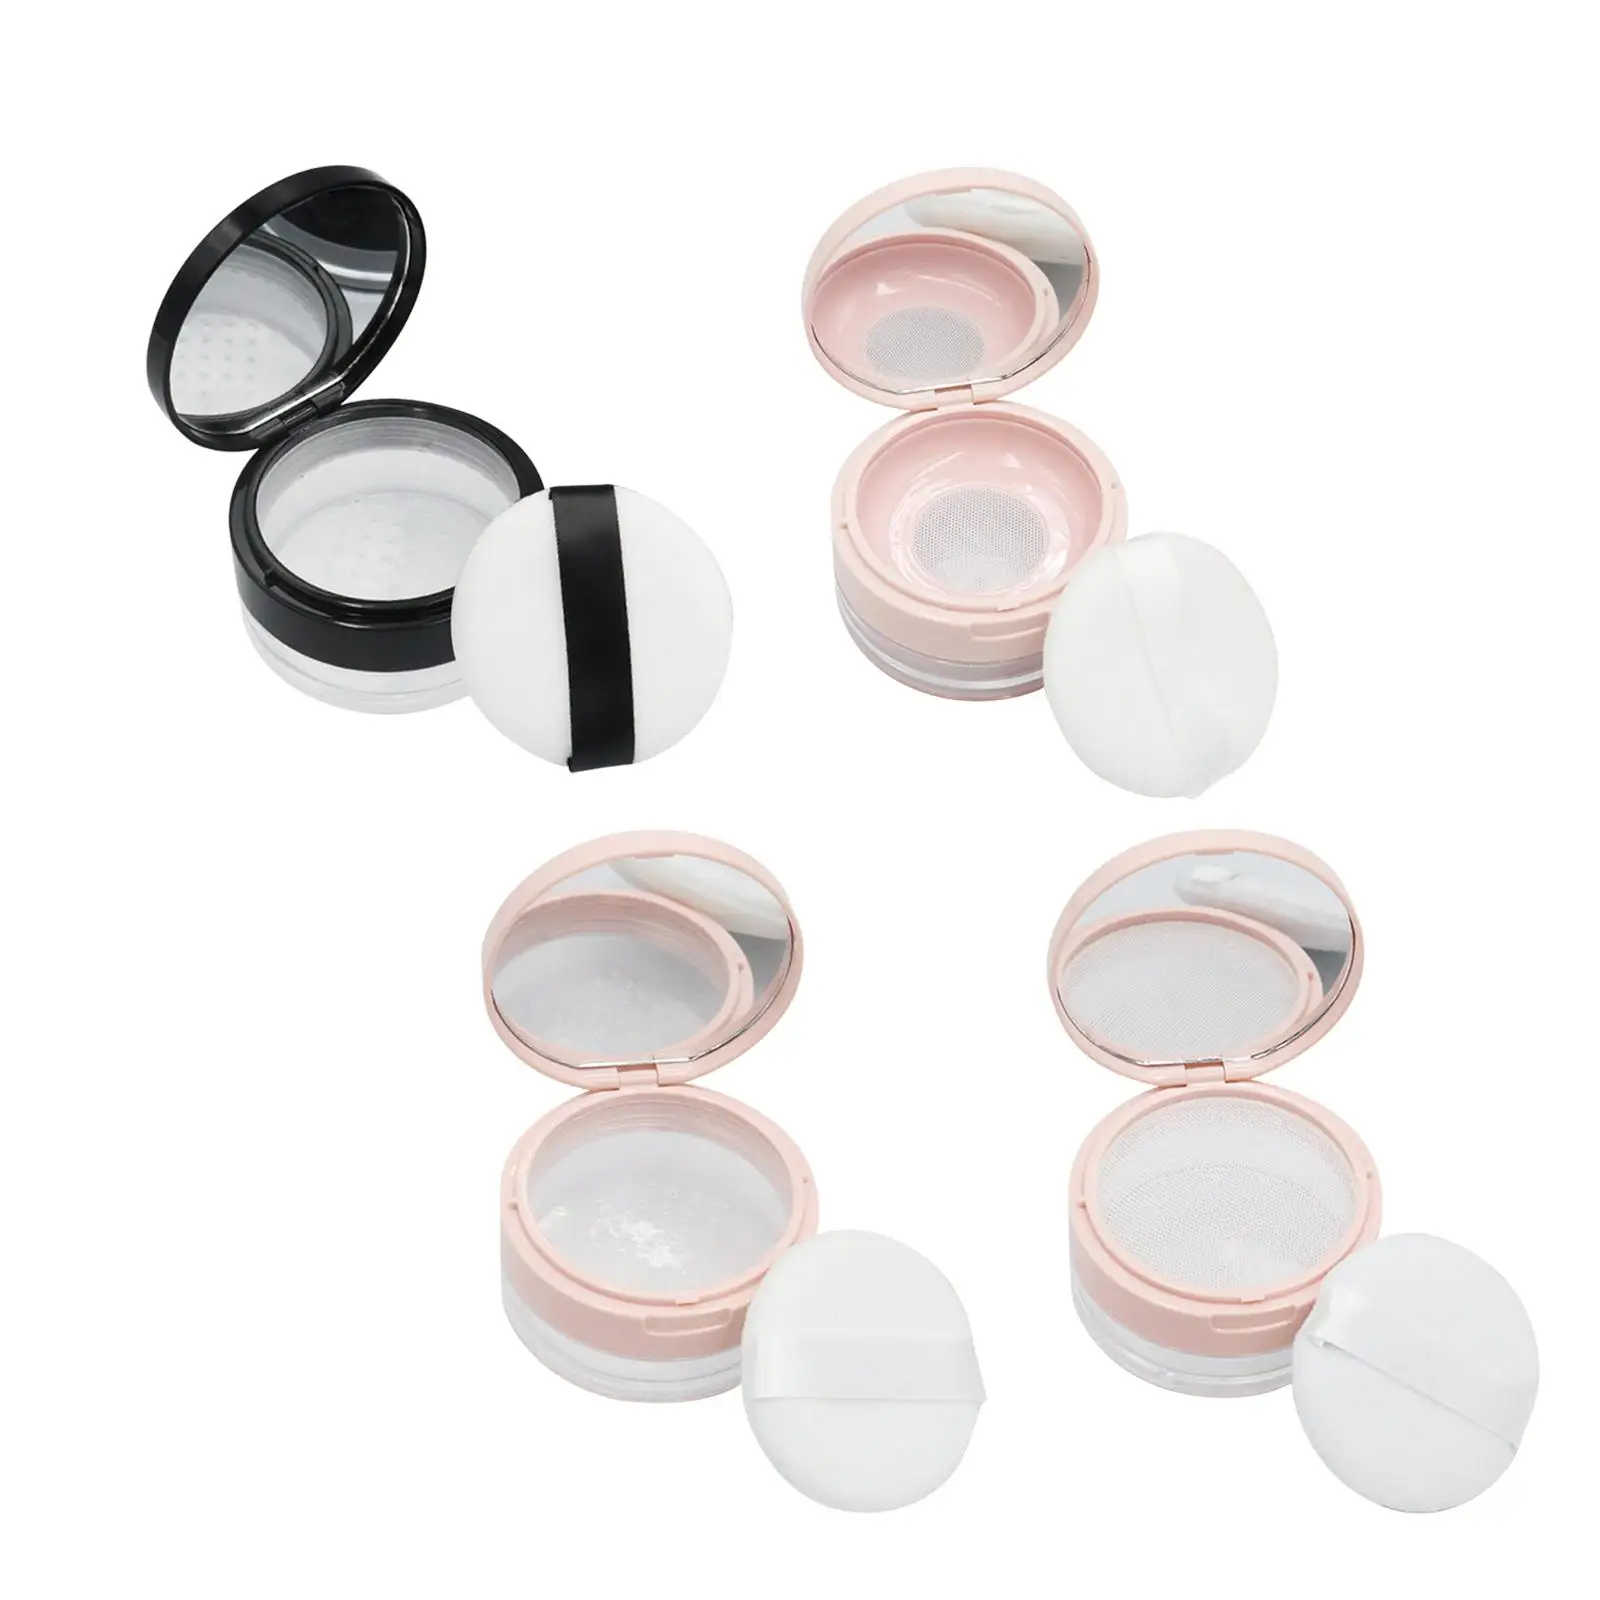 Empty Loose Face Powder Case with Sifter Powder Box Compact 20G Refillable Makeup Powder Container